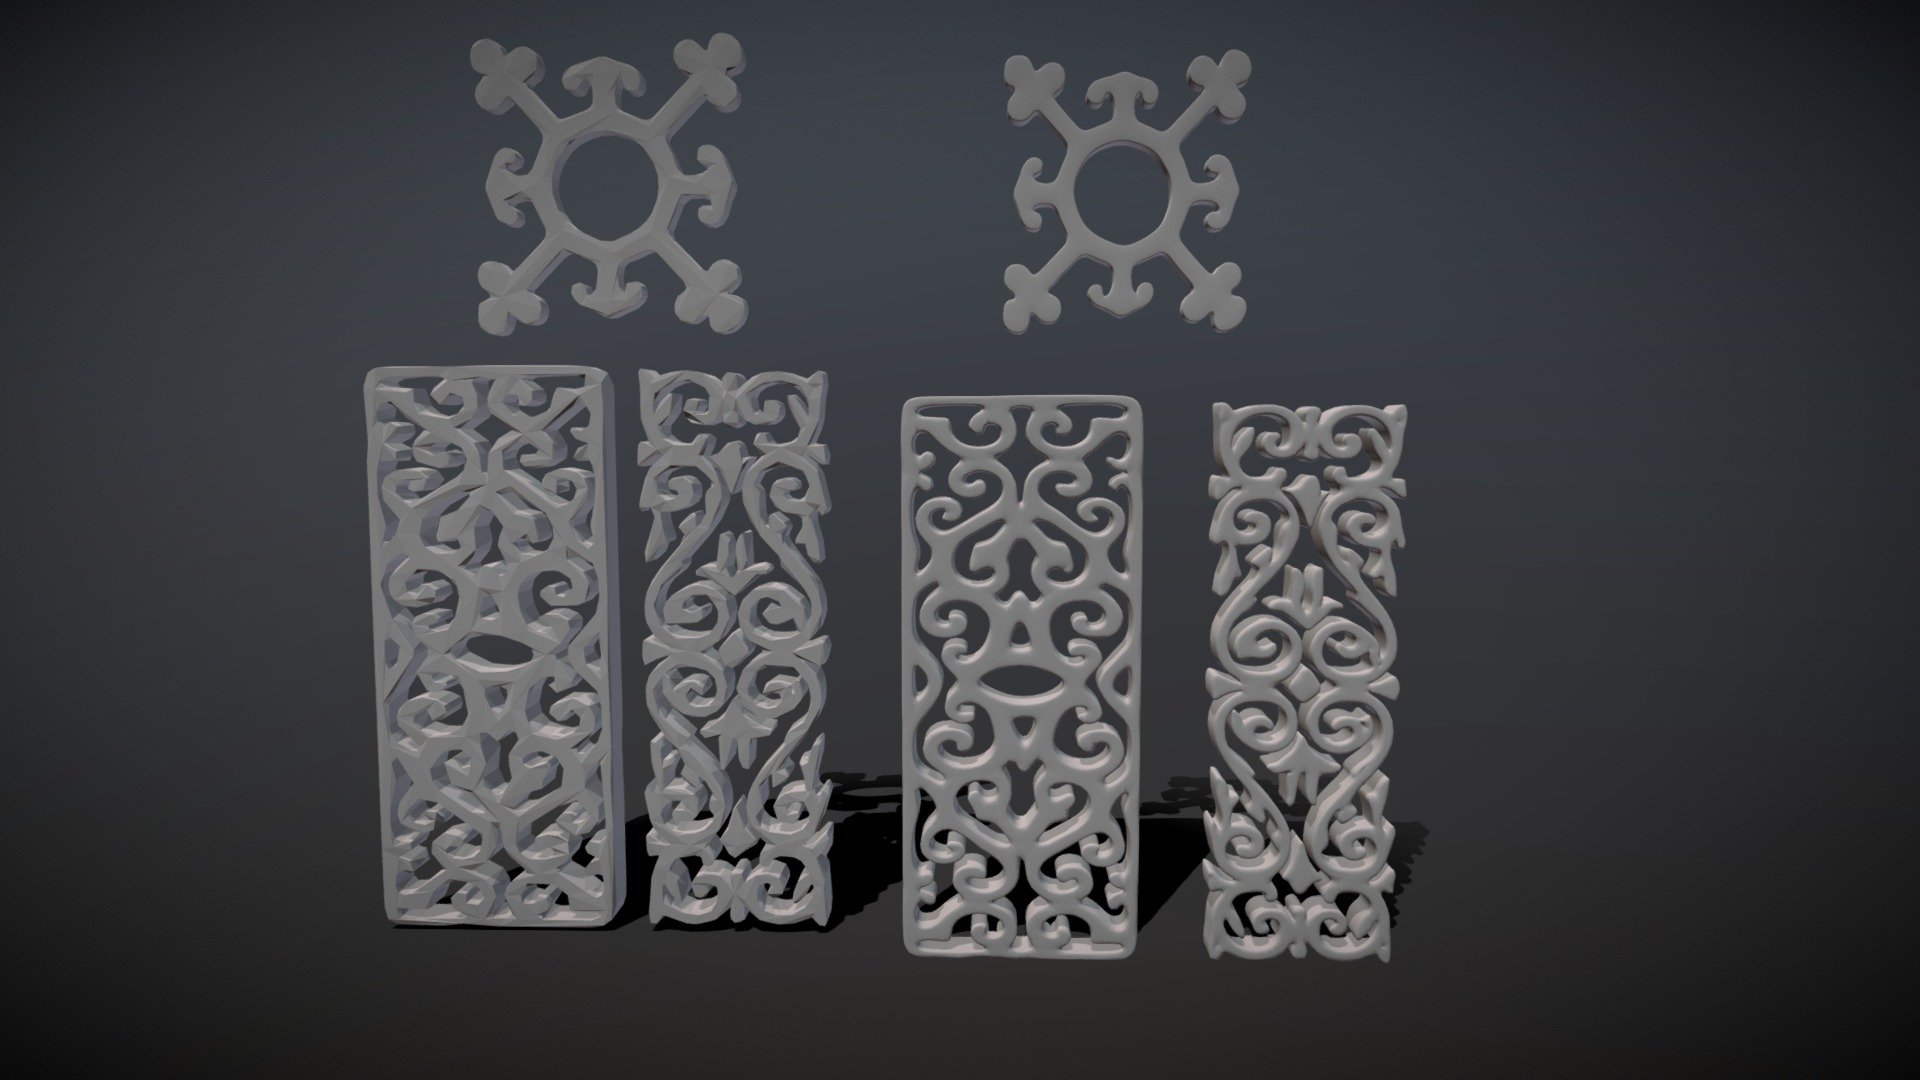 Iron grill
Two nversions
Low poly and high poly - Iron grill - Download Free 3D model by Deepak_Sharma 3d model